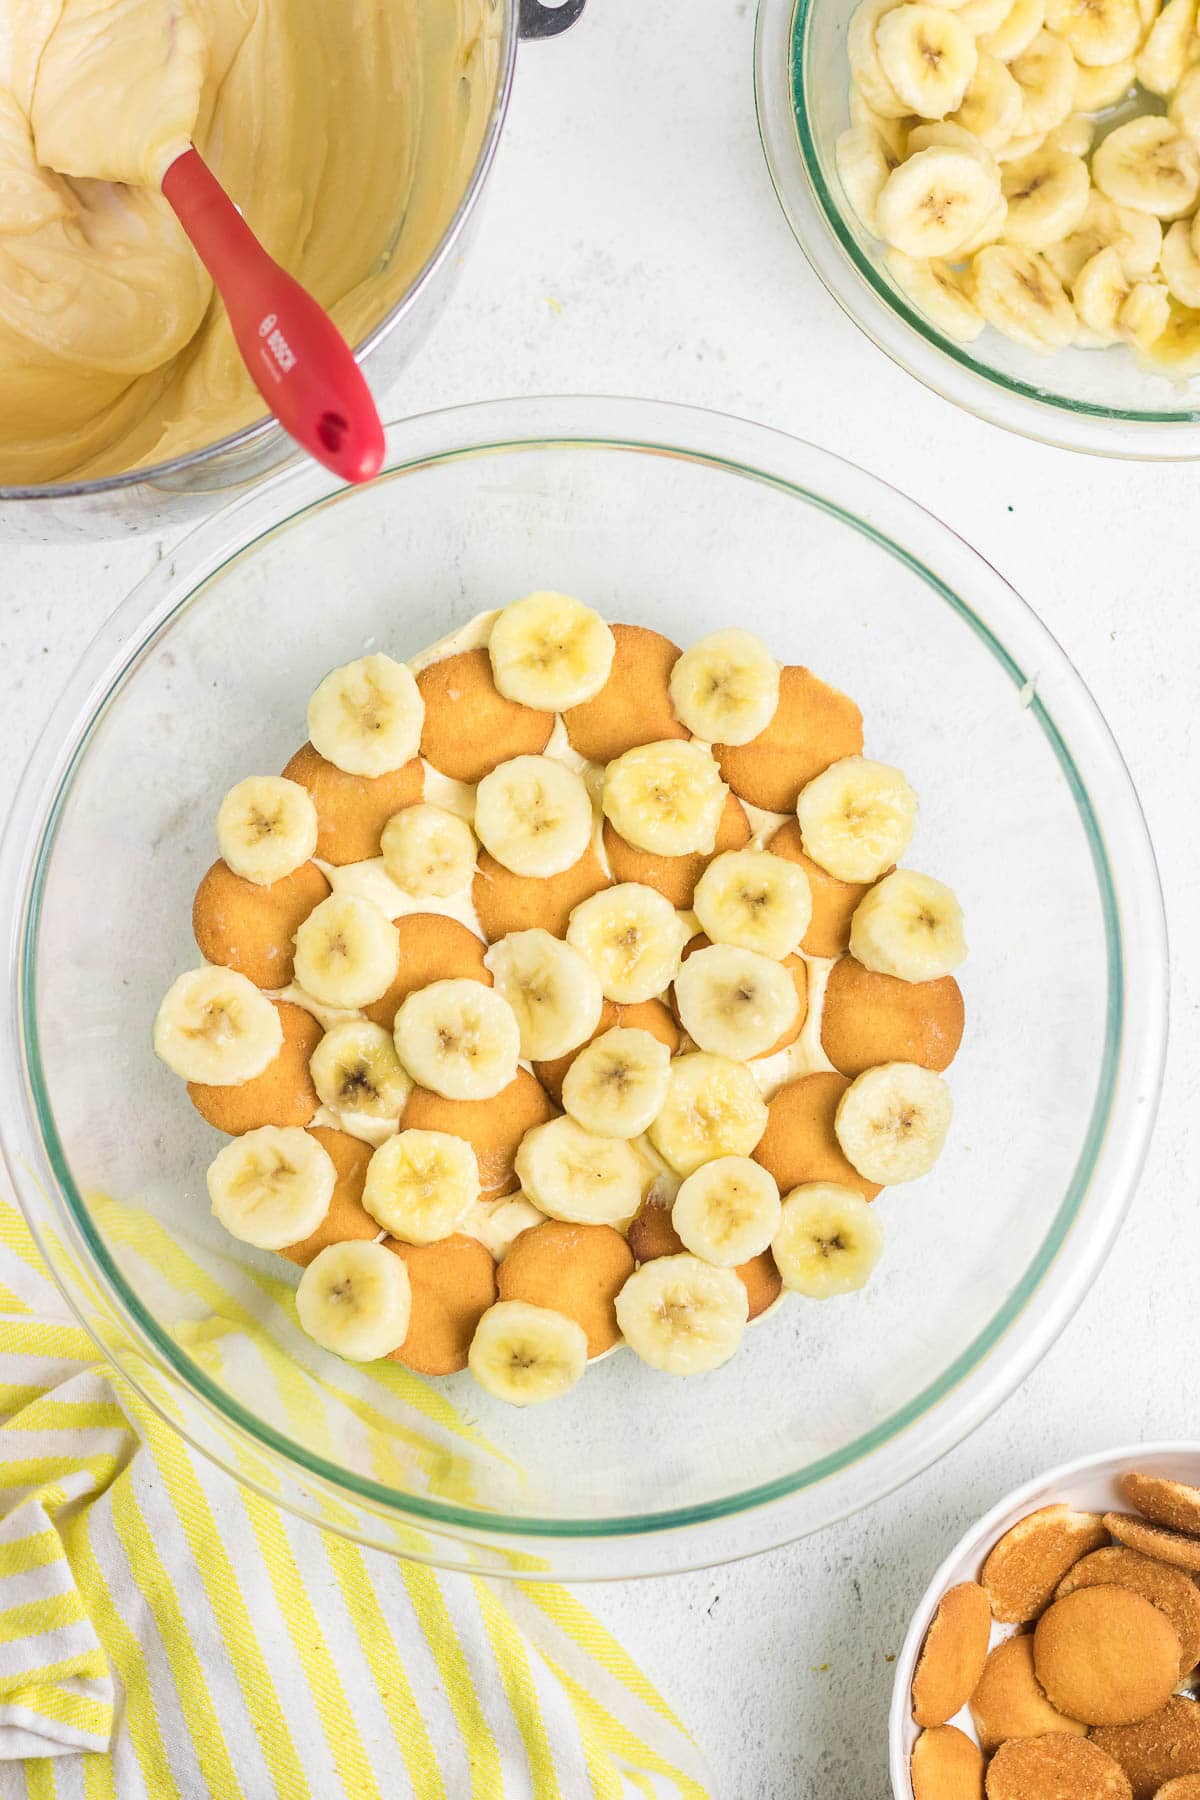 The first layers of pudding, Nilla wafers, and bananas in a bowl.